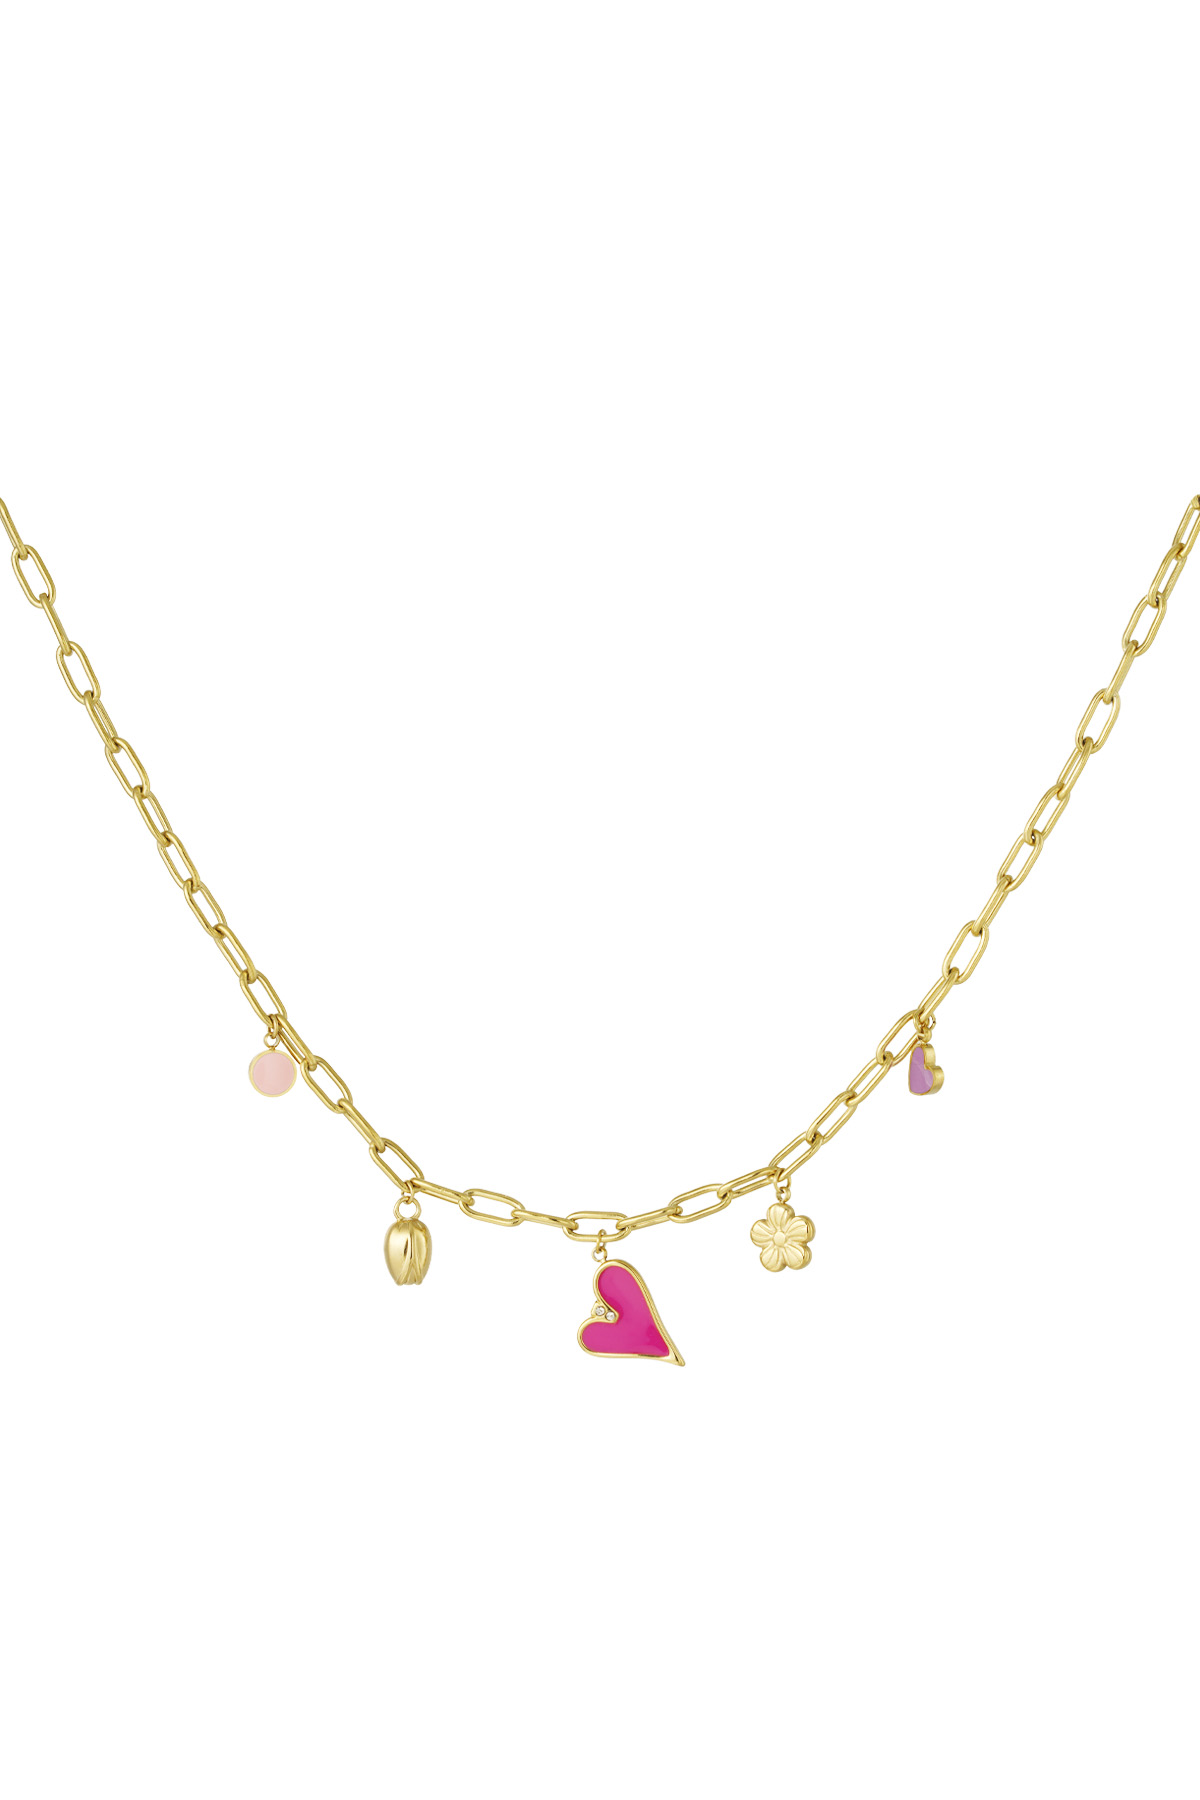 Charm necklace spring shades - gold